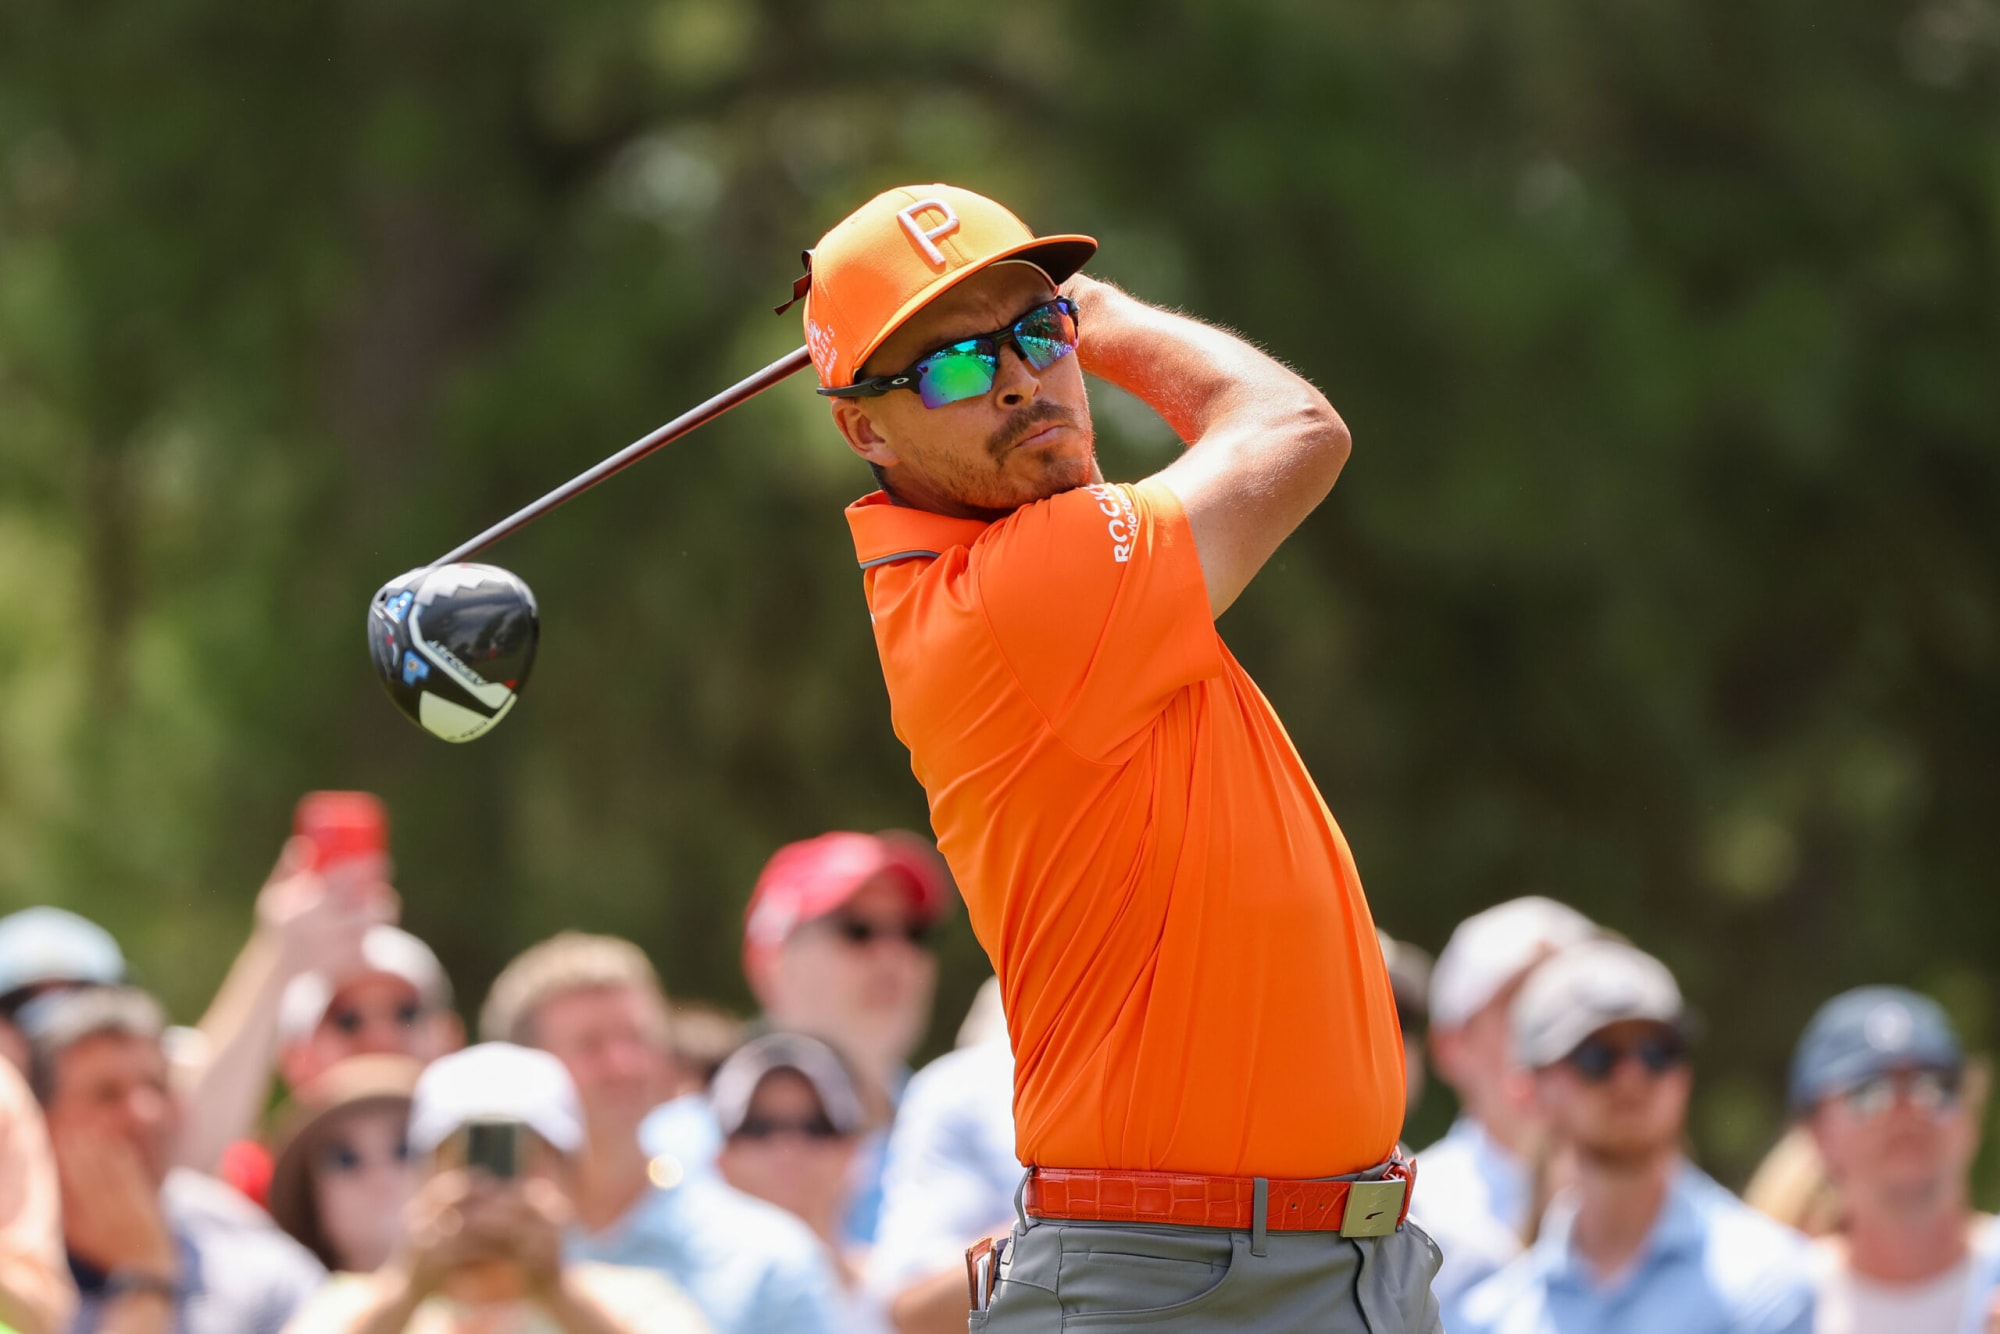 2023 PGA Championship Rickie Fowler poised to contend at Oak Hill